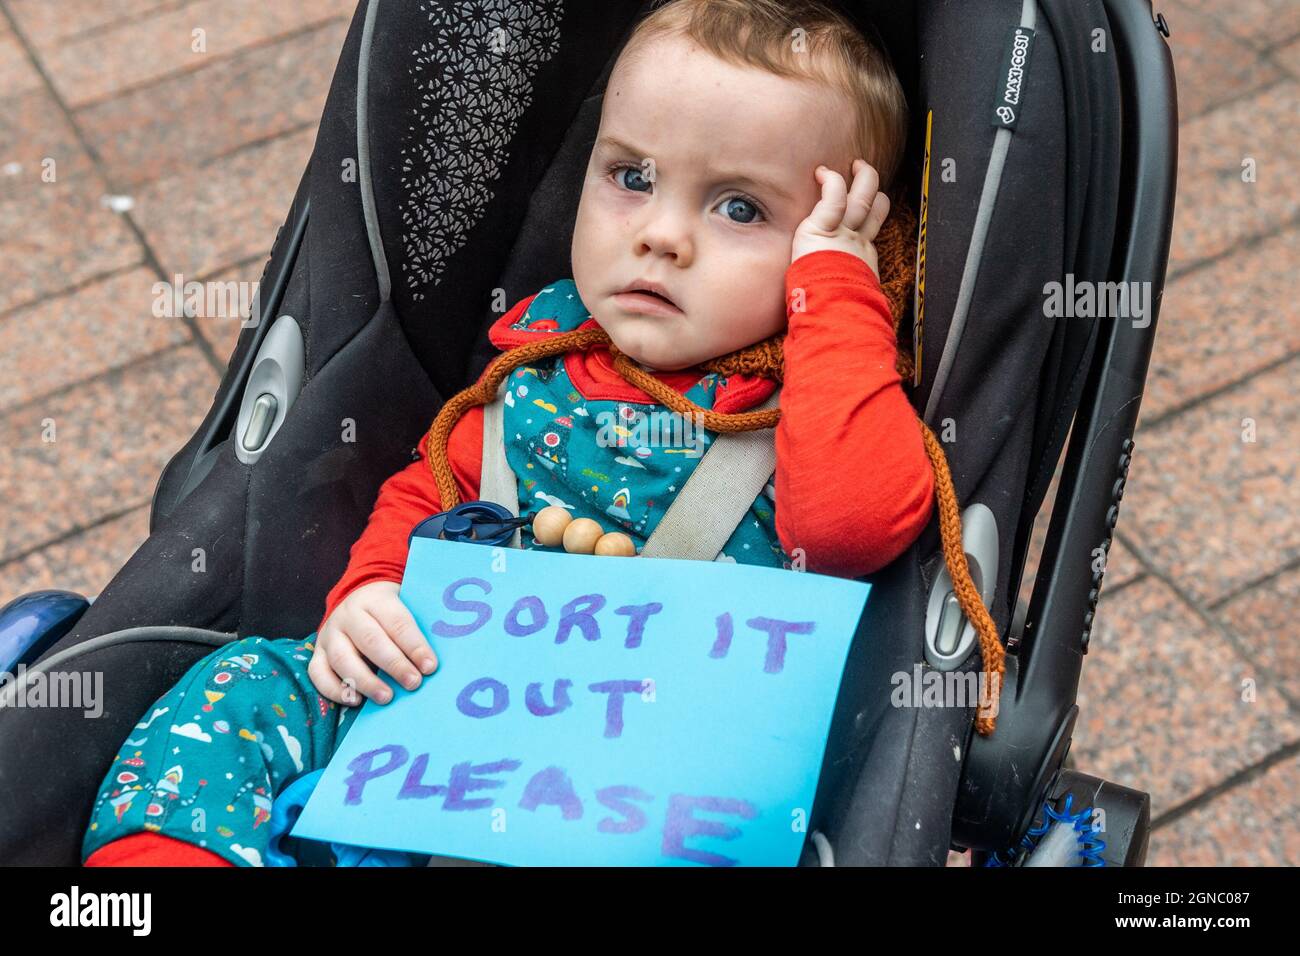 Cork, Ireland. 24th Sep, 2021. Fridays for Future held a global climate strike on Grand Parade in Cork city today, demanding climate justice within Ireland and around the world. At the protest was 9 month old Oisín O'Sullivan-Brennan from The Lough. Credit: AG News/Alamy Live News Stock Photo